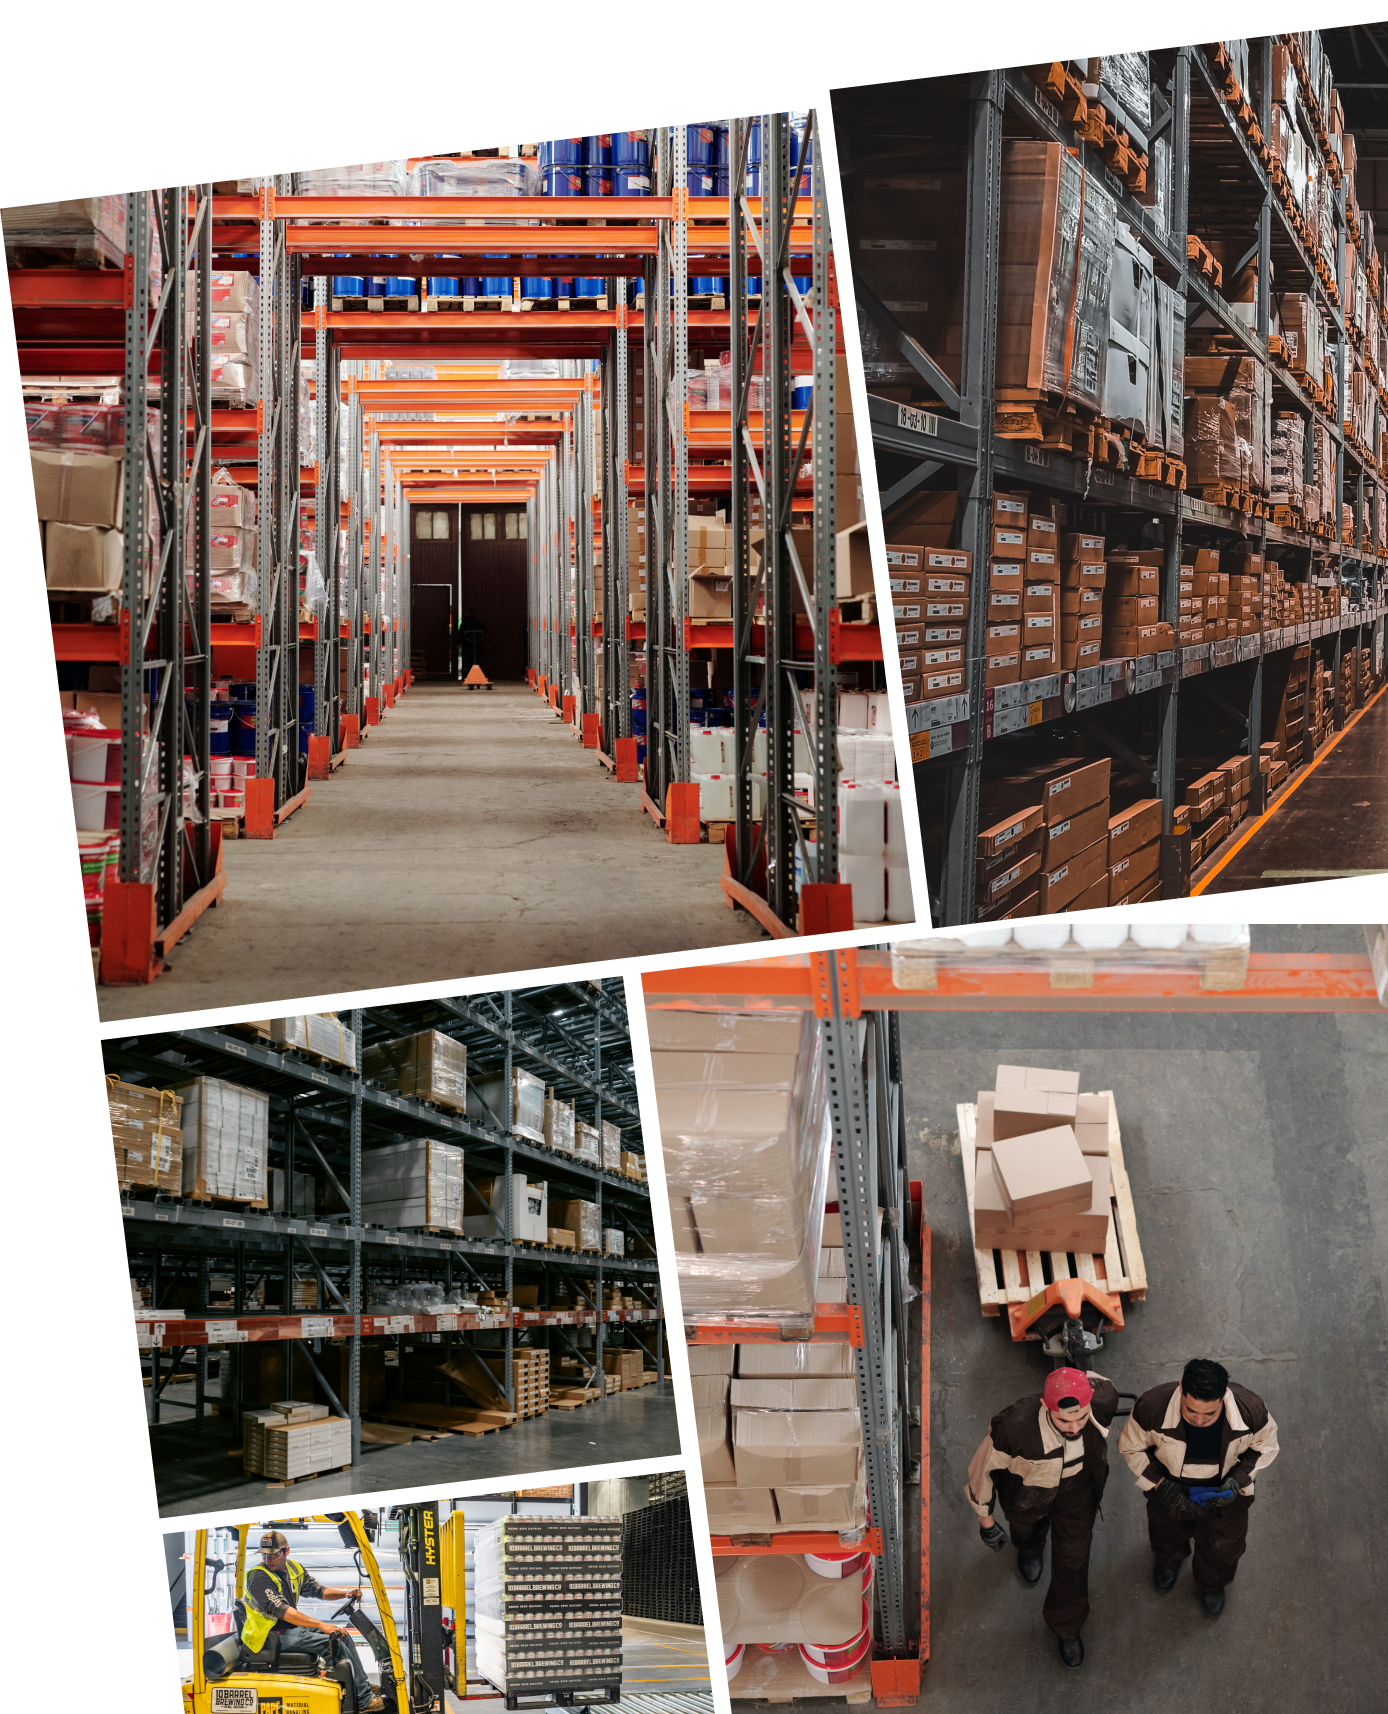 A collage of photos of Interior of a warehouse with rows of shelving stocked with goods and employees working.